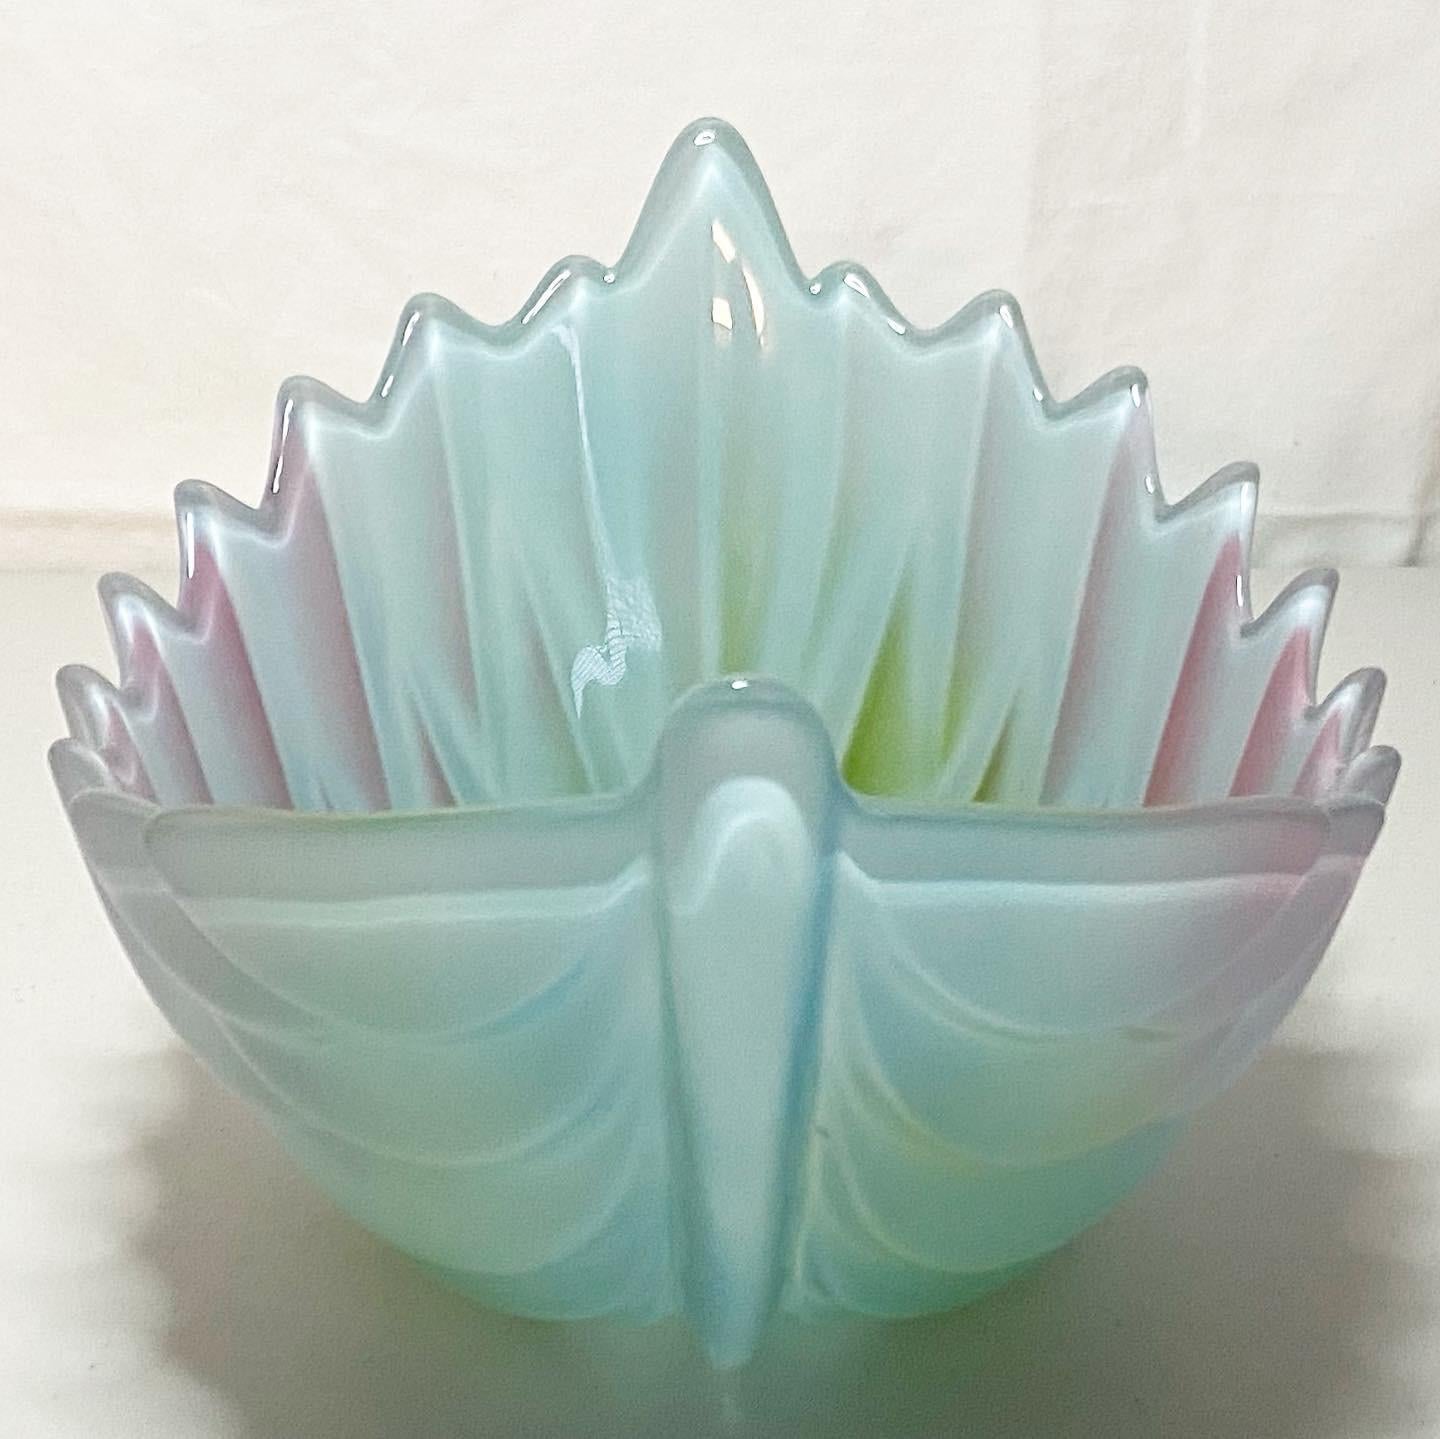 Gorgeous pink, blue, and green large leaf shaped glass serving bowl.

Additional information:
Material: Glass
Color: Green, Pink
Style: Postmodern
Time Period: 1980s
Dimension: 8.5